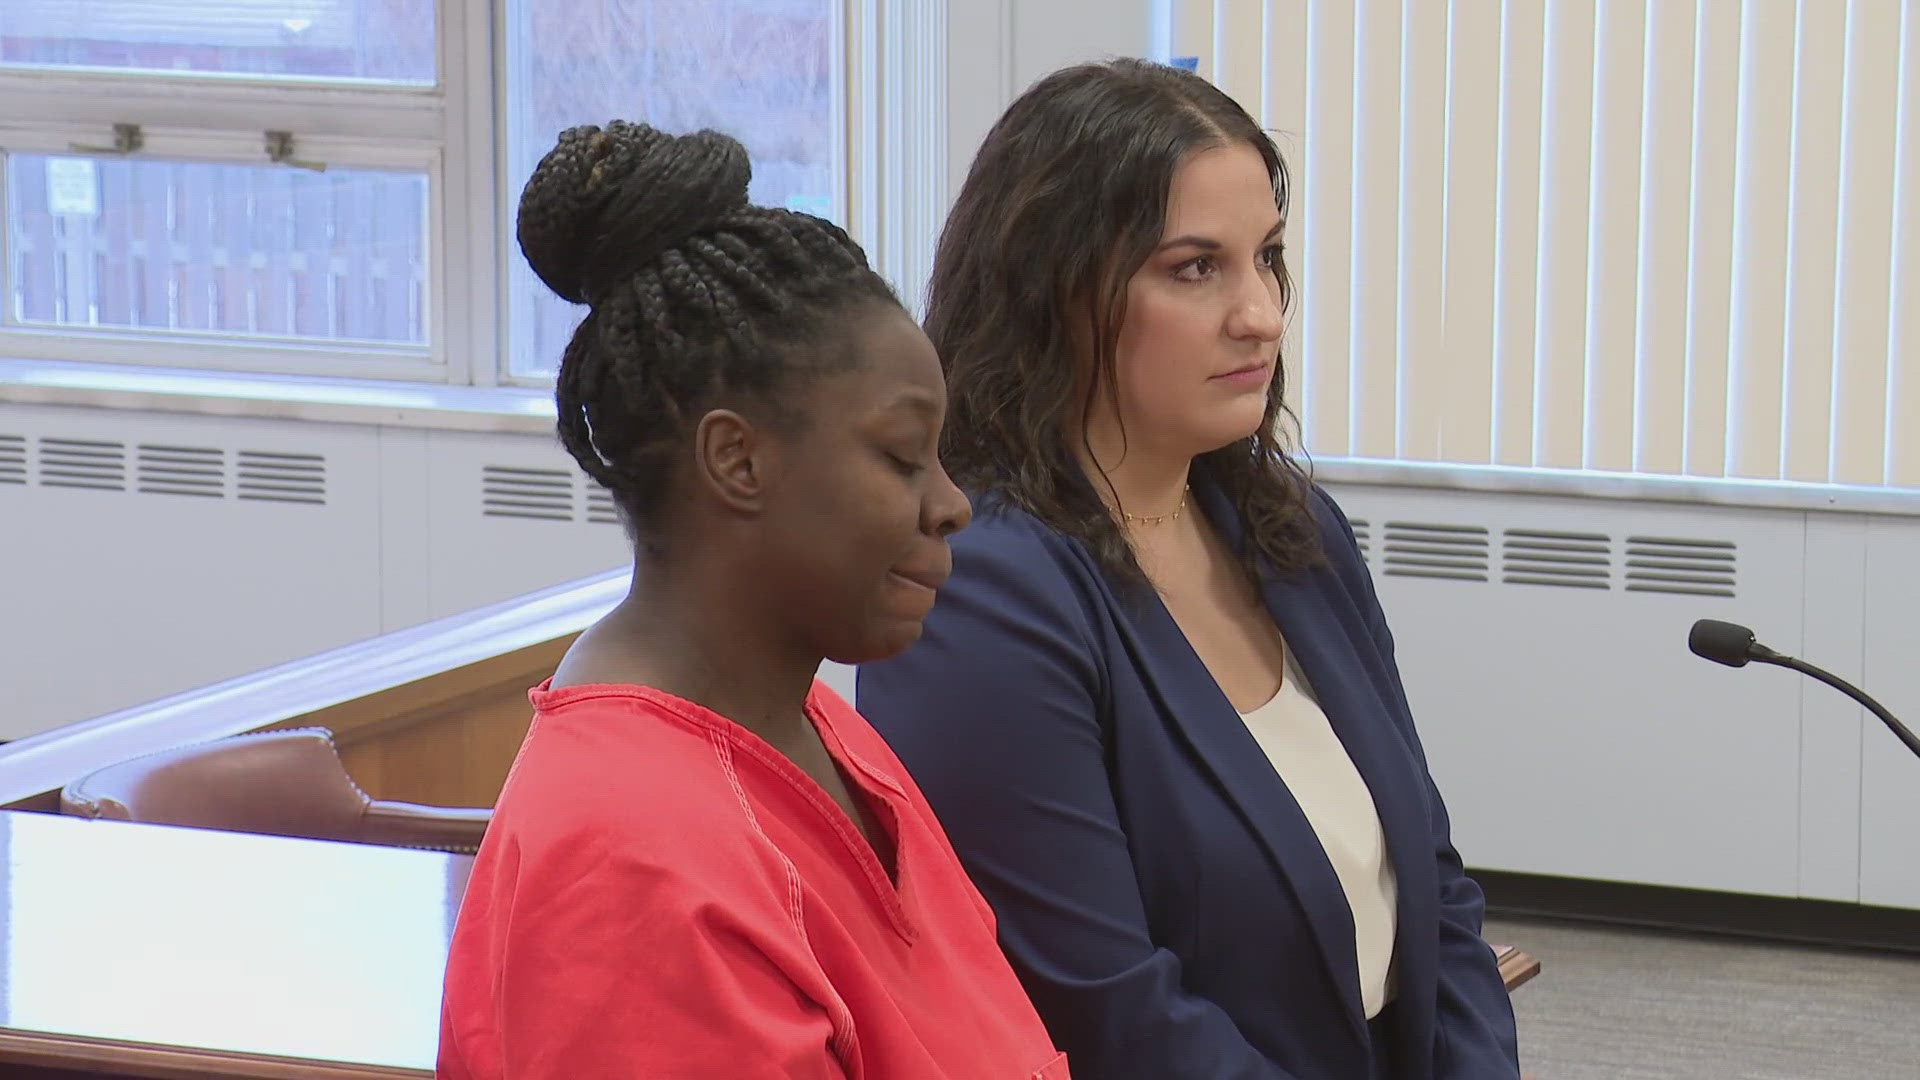 30-year-old Ariel Walters, the woman at the center of a days-long Amber Alert in Lakewood late last year, has now pleaded guilty to charges connected to the case.